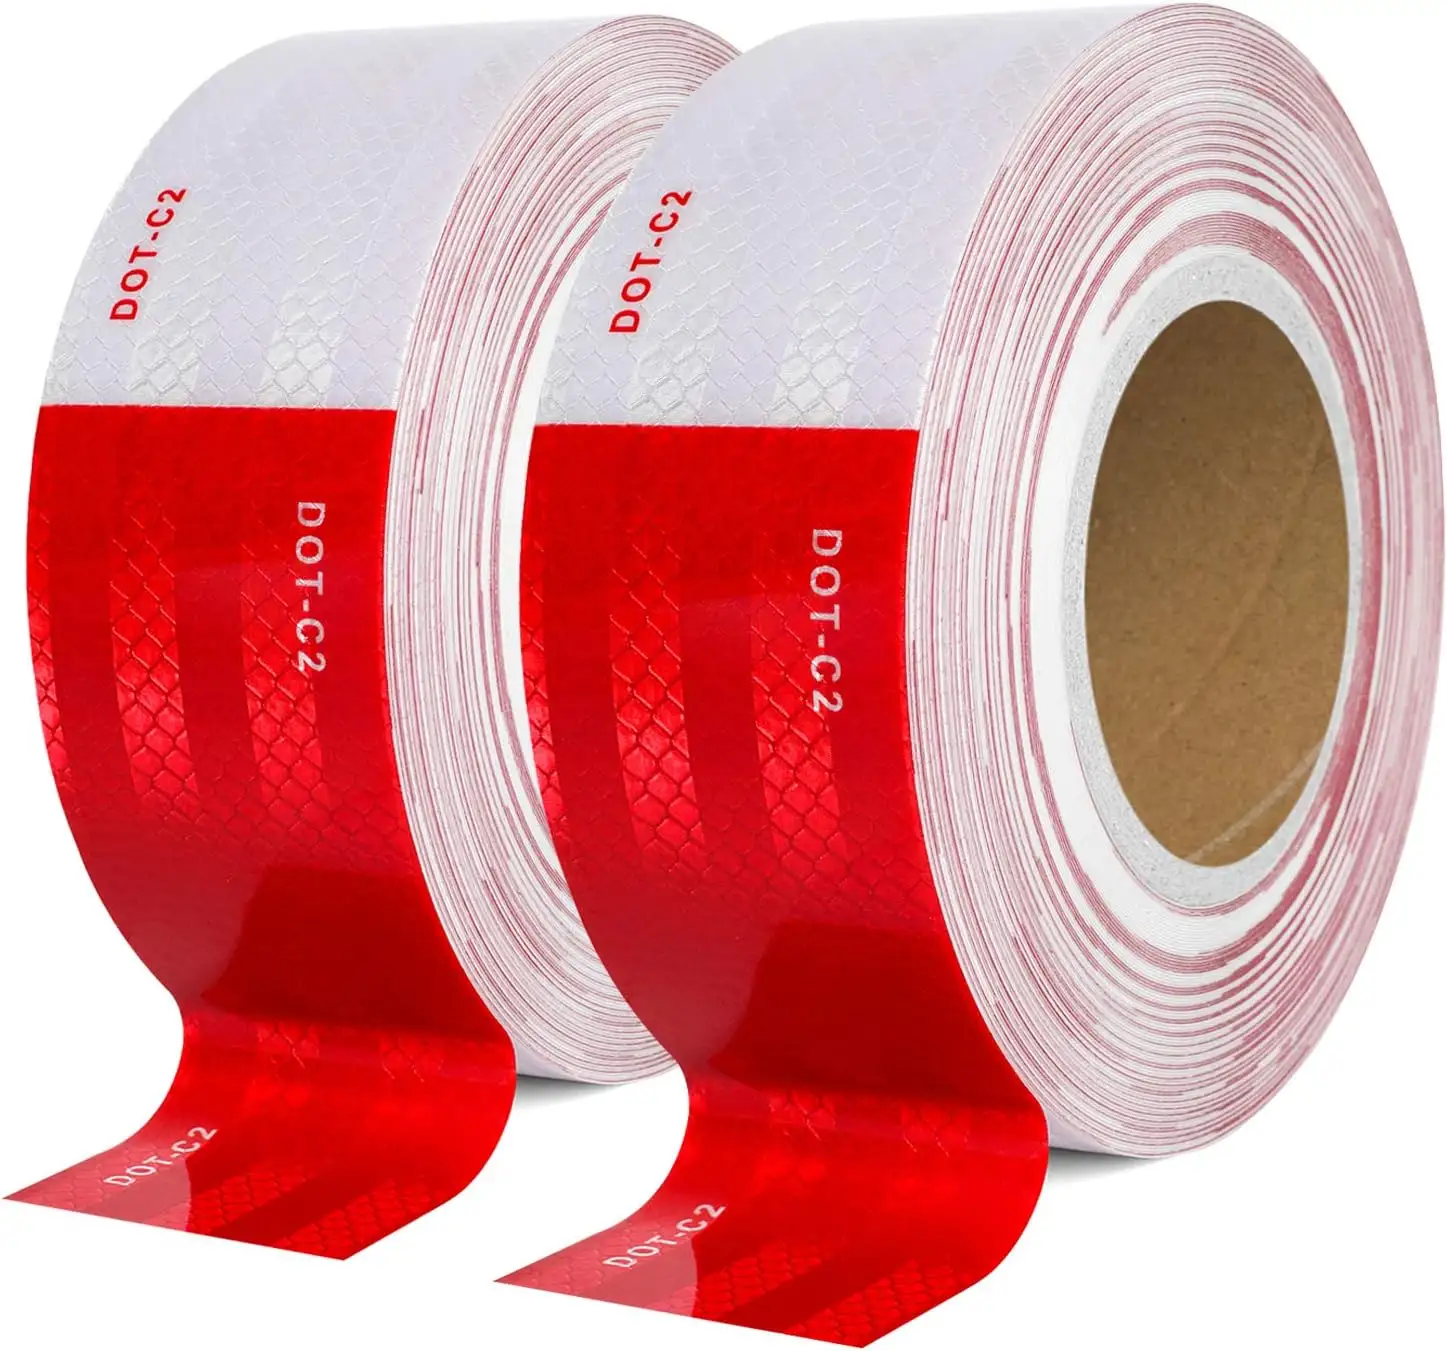 Reflective Safety Tape DOT-C2 Waterproof Red and White Adhesive conspicuity tape for trailer, outdoor, cars, trucks